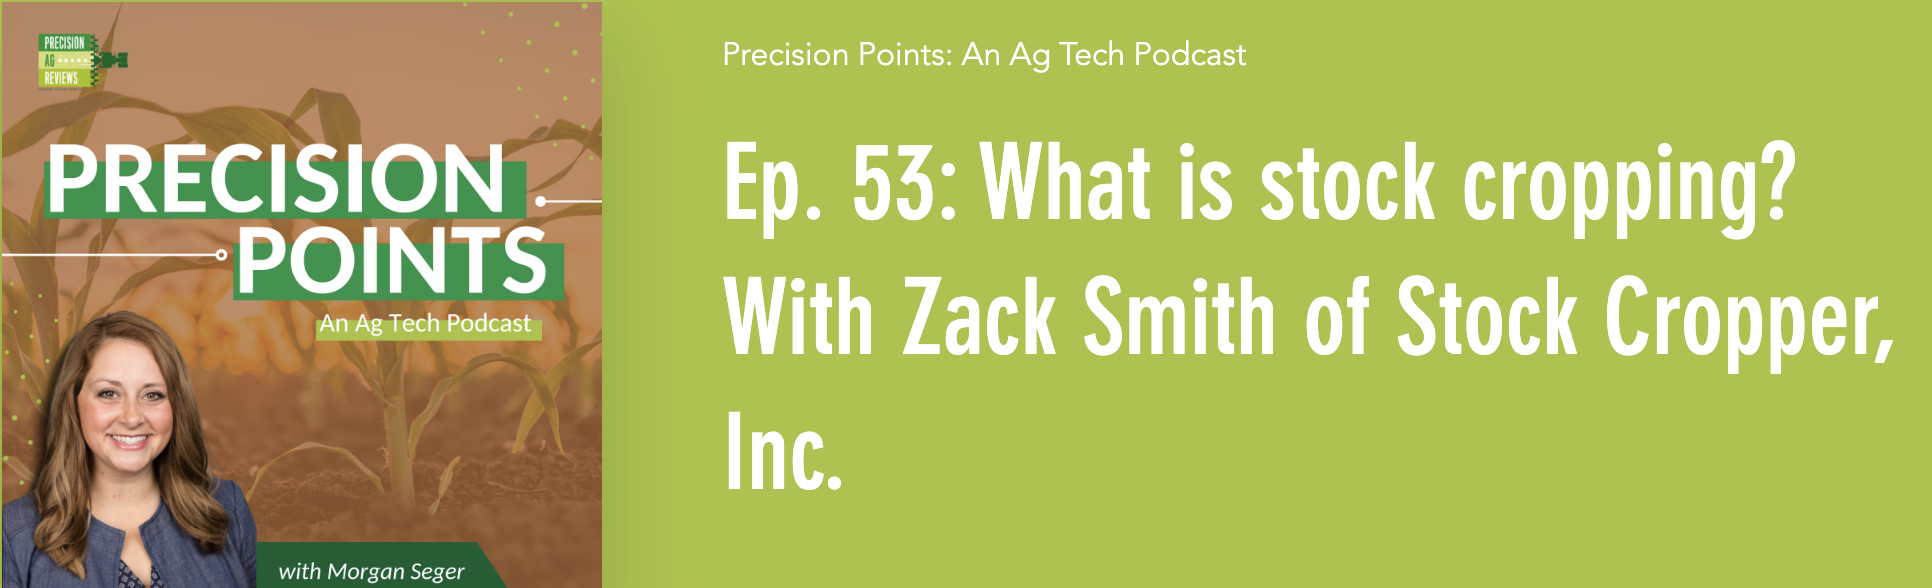 Ep. 53: What is stock cropping? With Zack Smith of Stock Cropper, Inc.